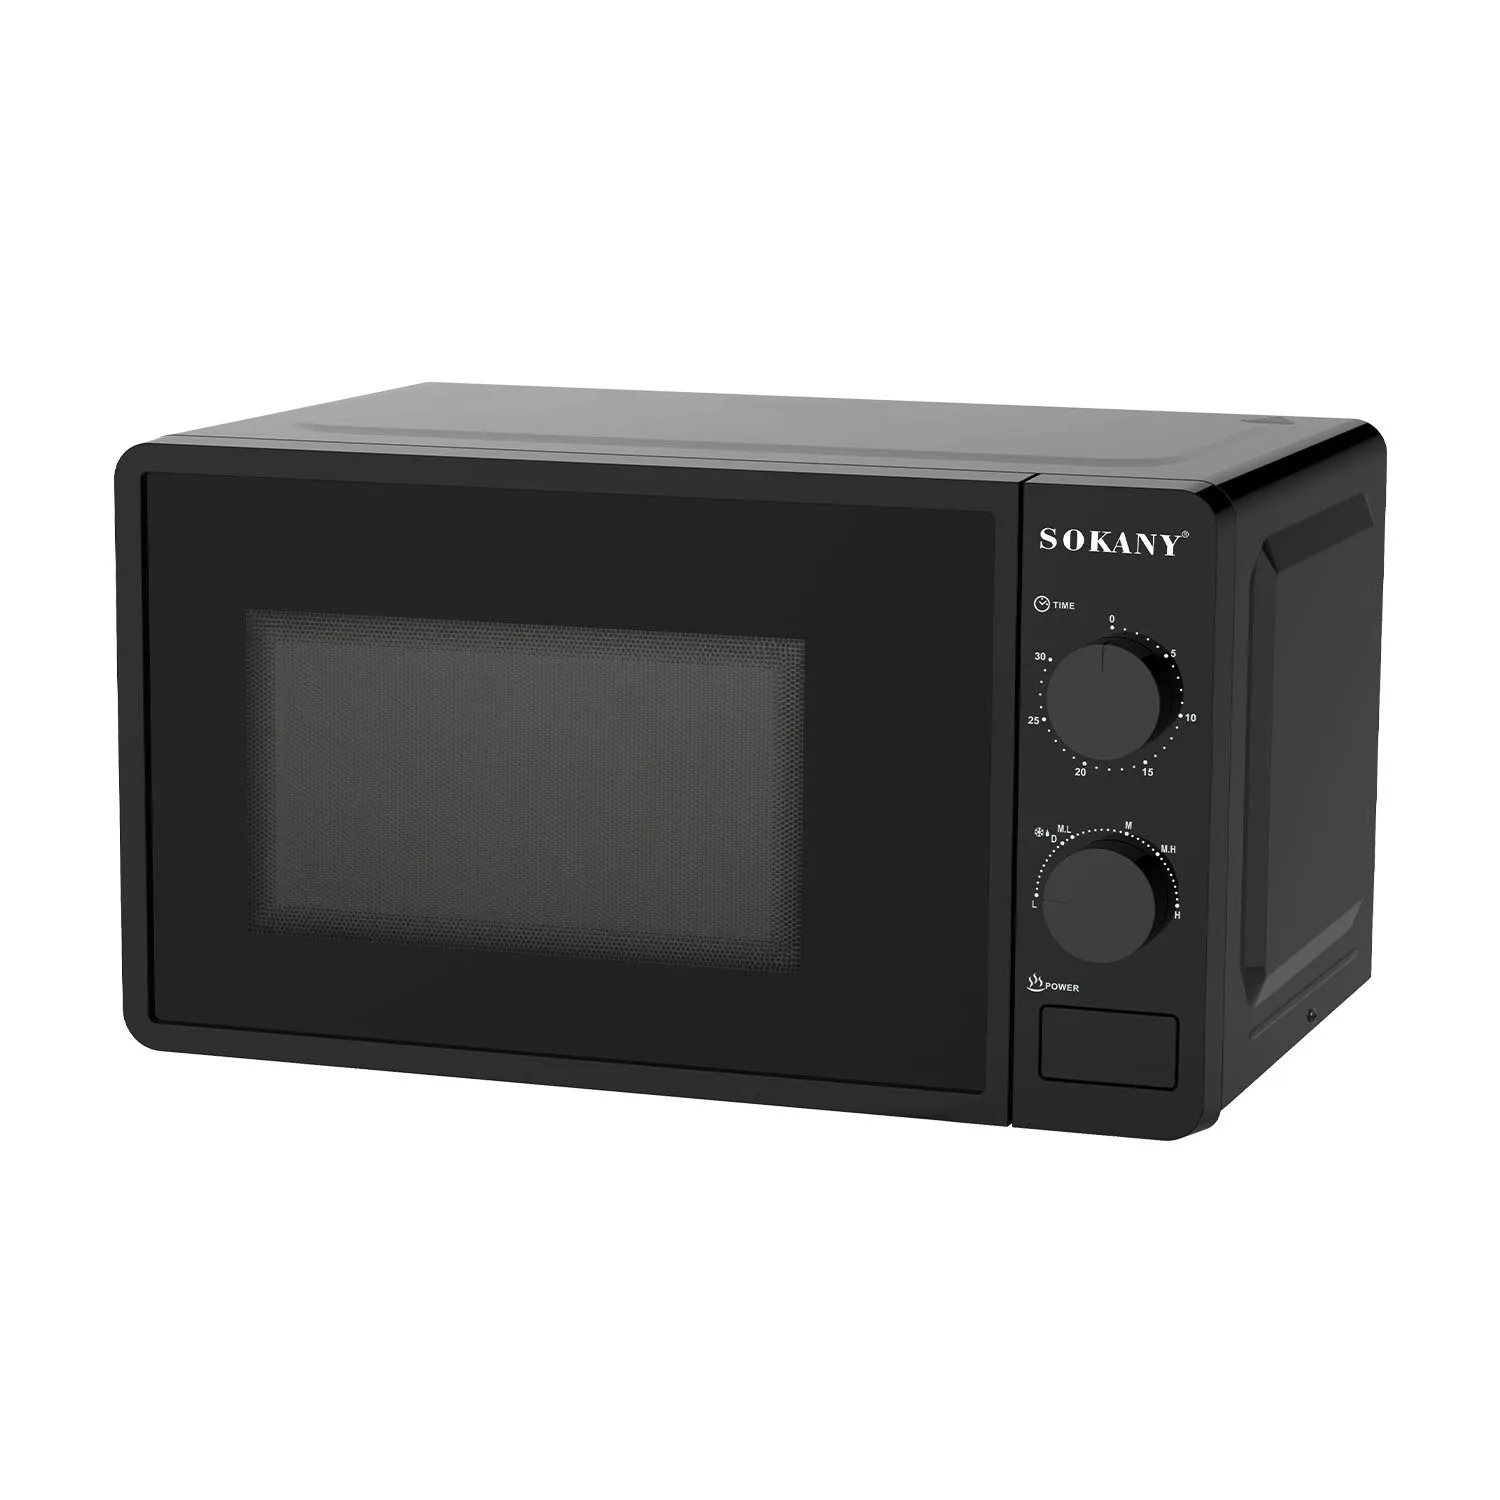 Sokany Hot Sales 20l Microwave Oven Home Use Cooking Appliances ...